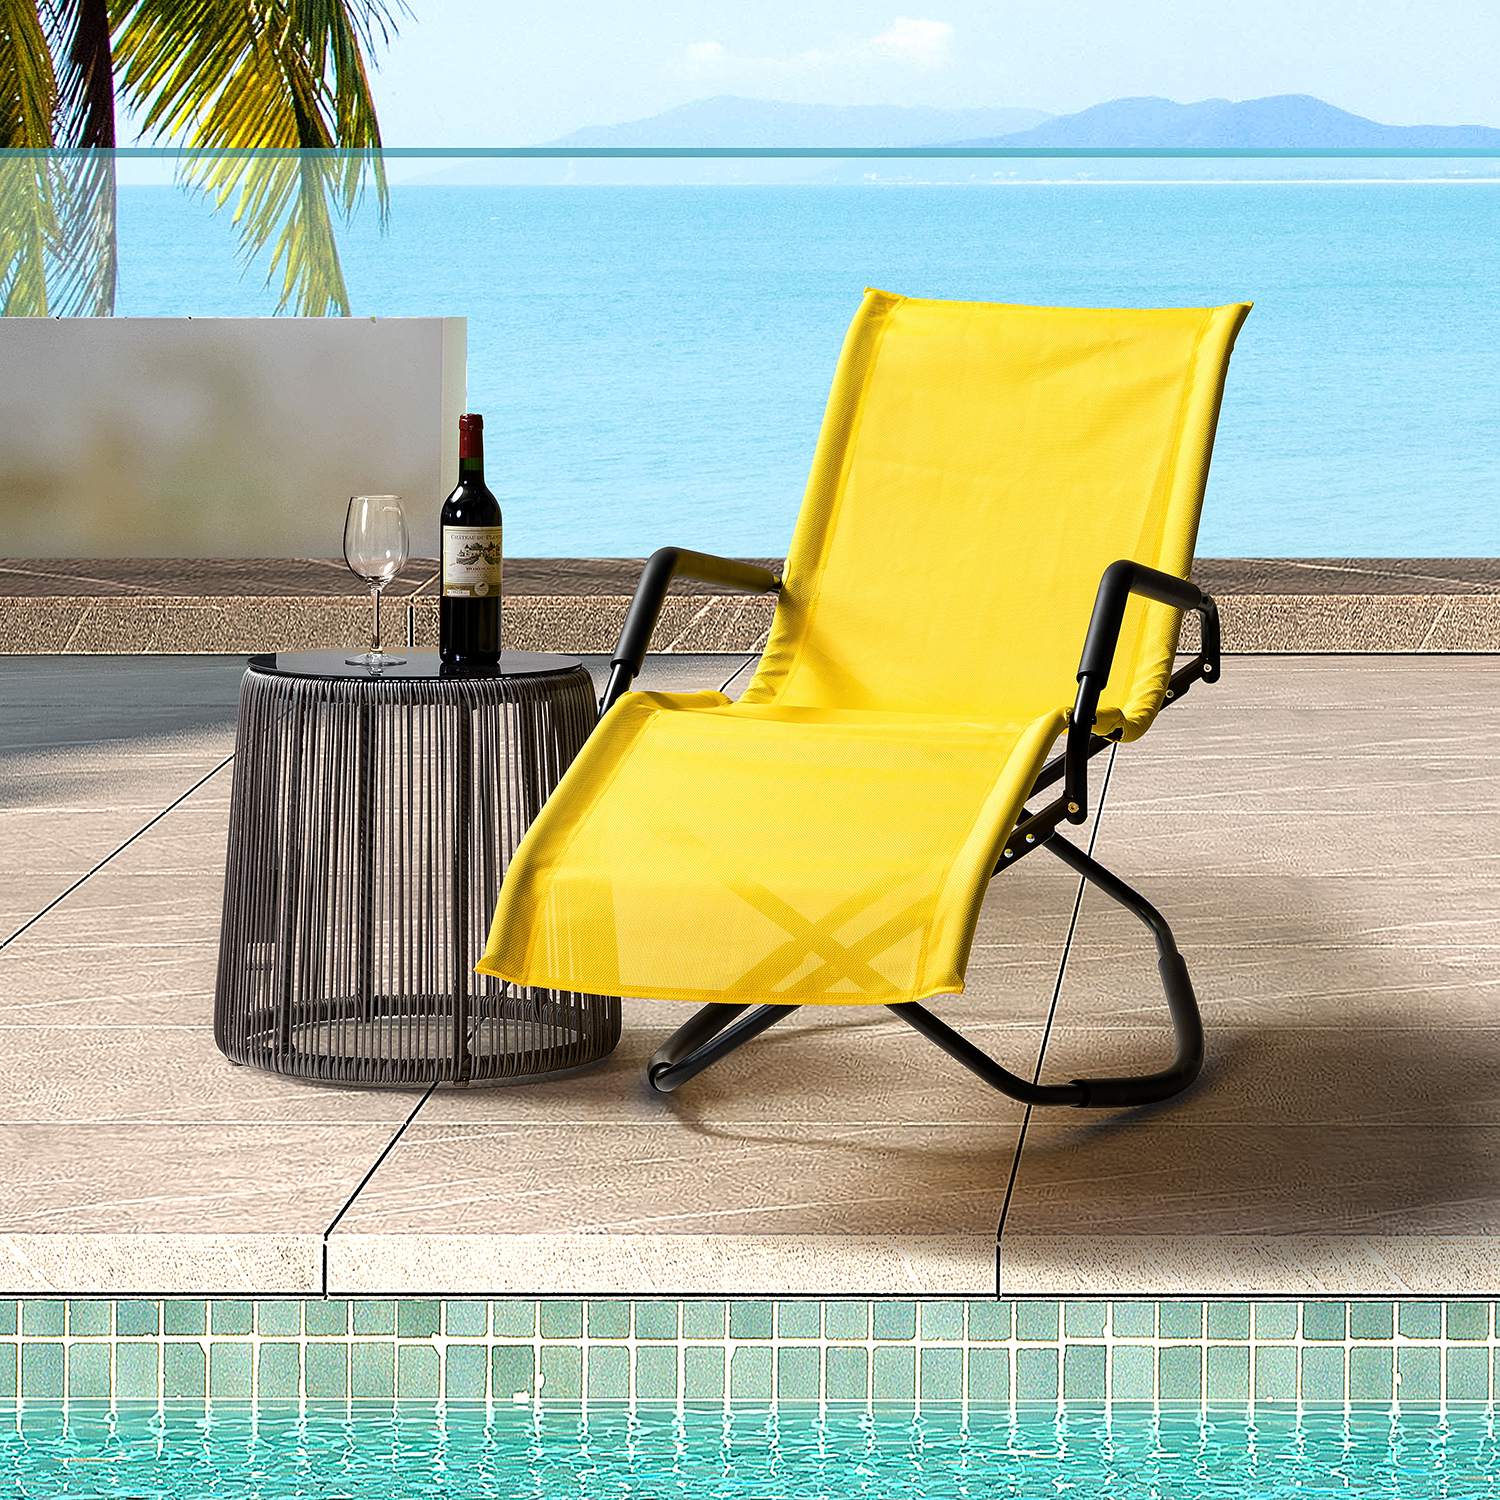 Folding Lounge Chair, Patio Rocking Chaise Chair with Armrests, Beach Lightweight Reclining Chair, Outdoor Portable Folding Chair, Lounge Chaise Chair for Camping, Pool, Lawn, Garden, D7837 - image 1 of 9